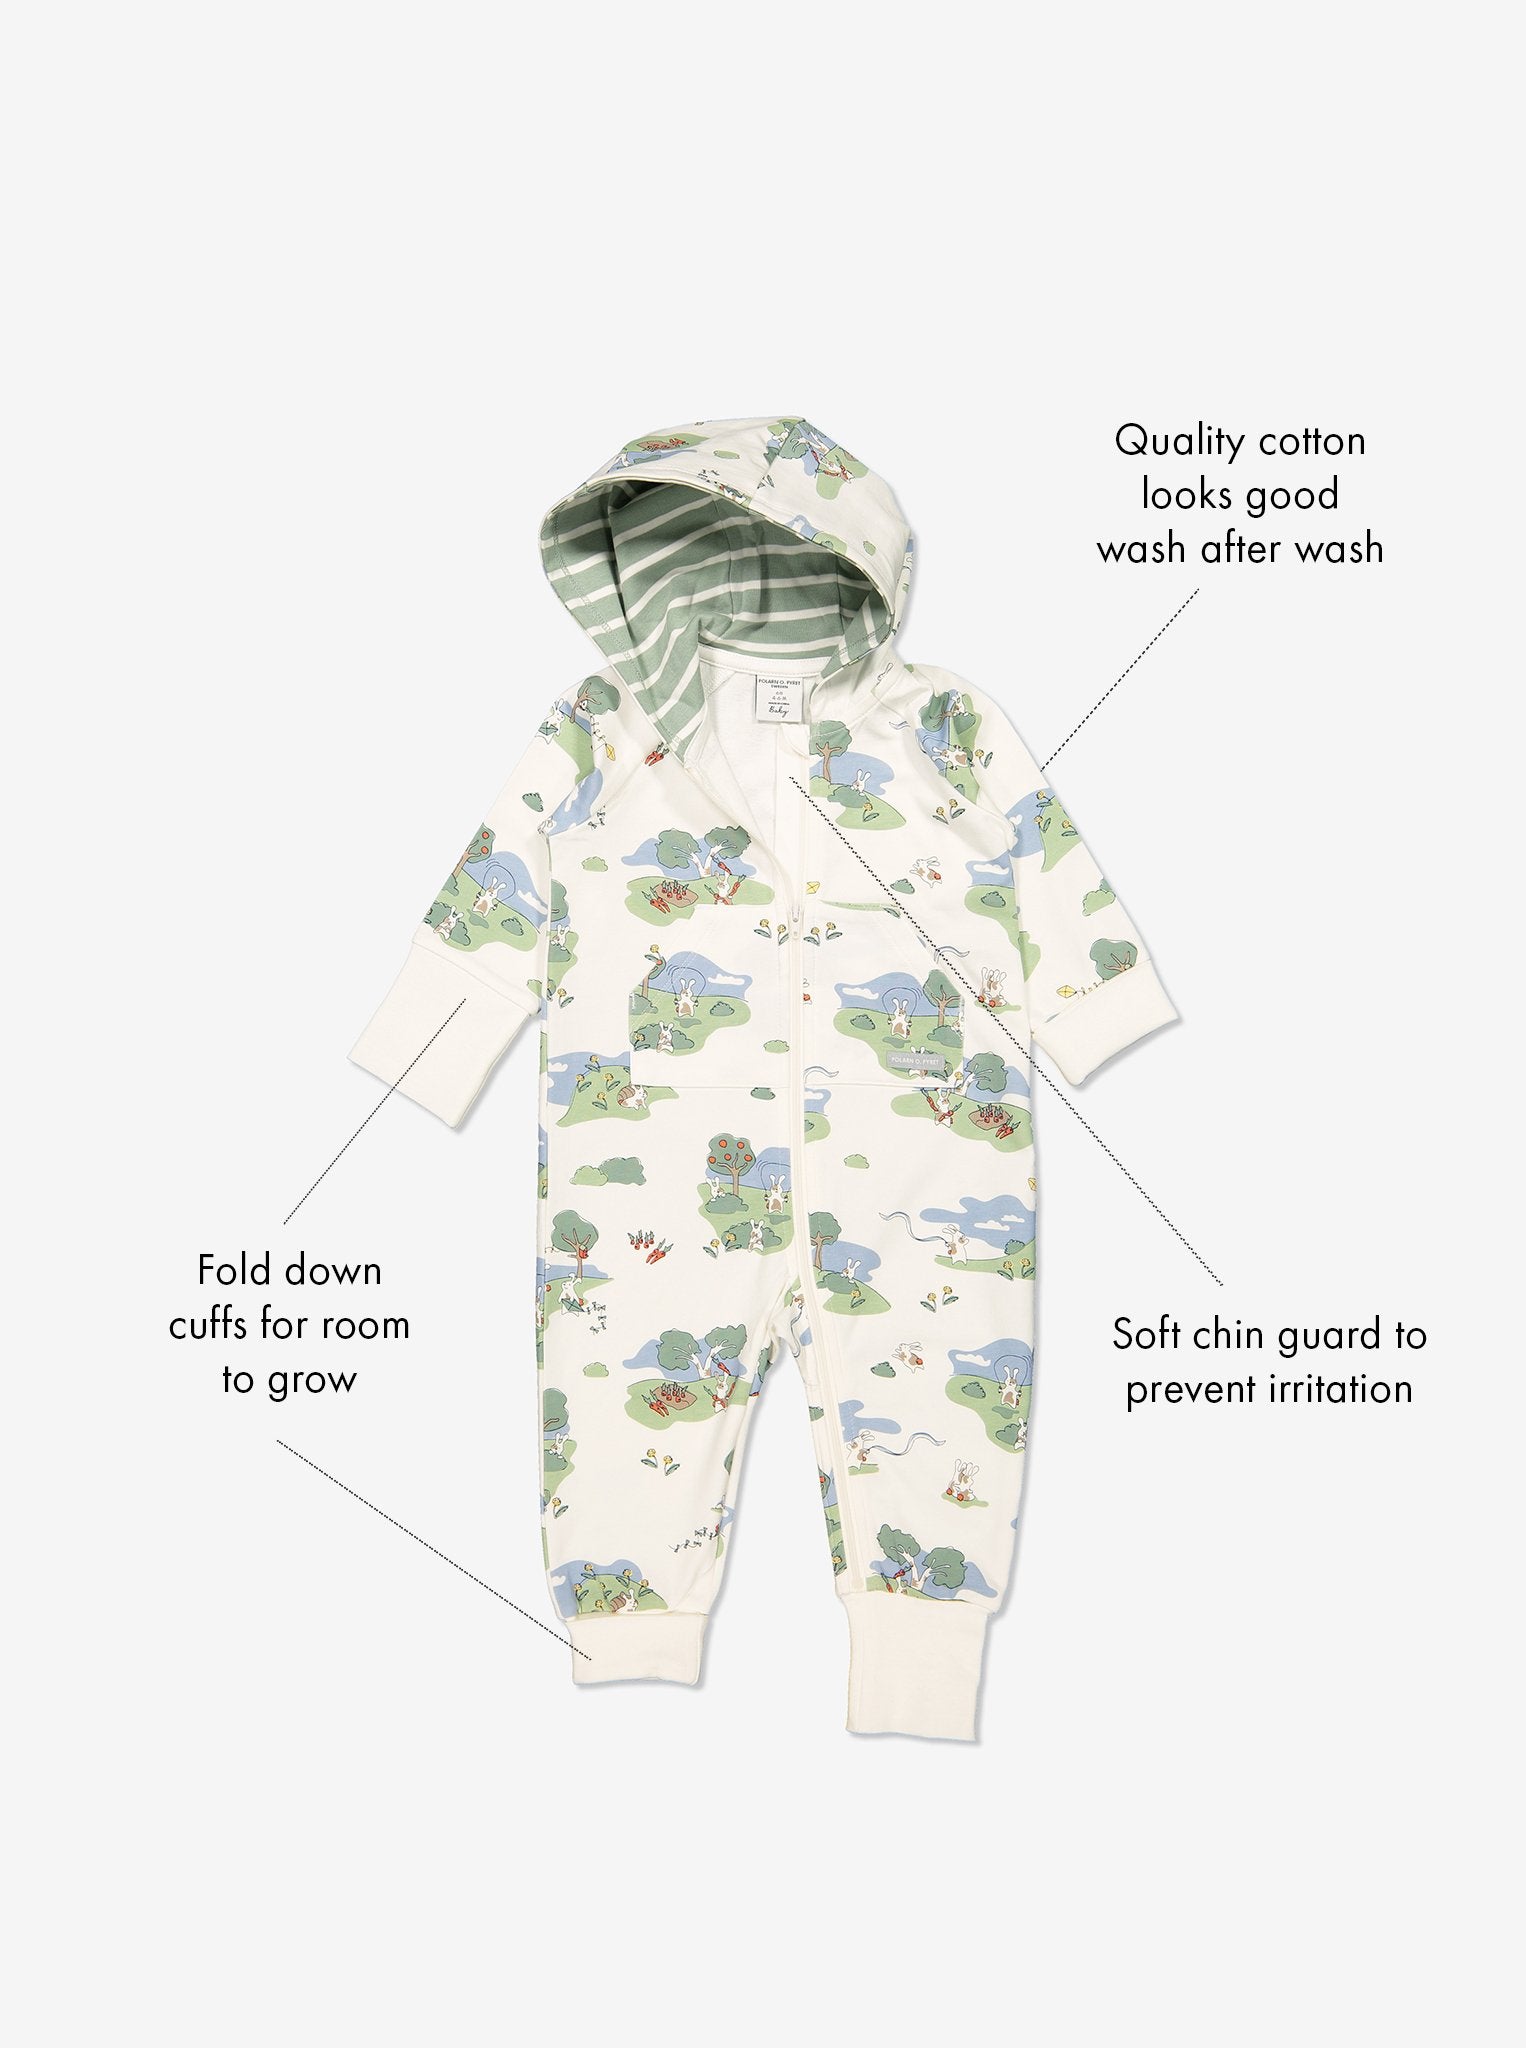 GOTS organic cotton baby all-in-one in a playful bunny print with text labels shown on the sides